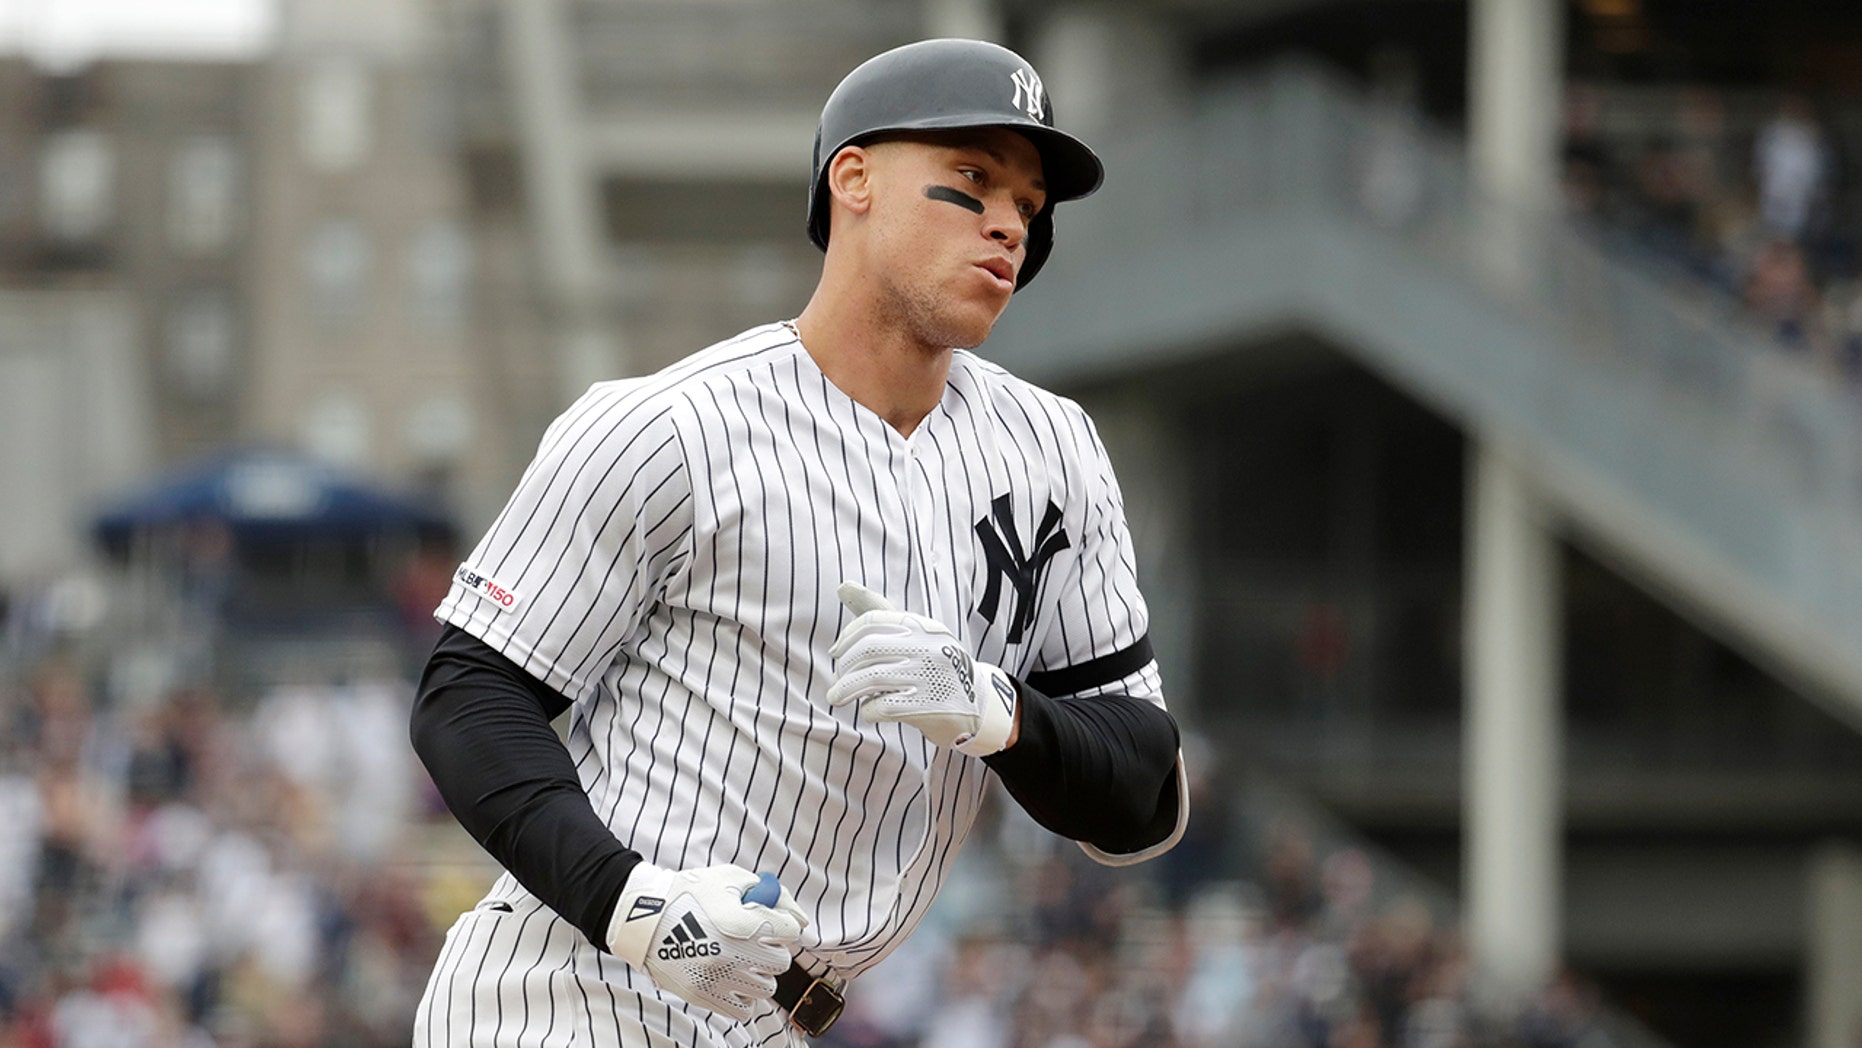 Aaron Judge of the New York Yankees leads the bases after hitting a solo pass against Kansas City Royals relief pitcher Heath Fillmyer in the first round of a baseball game on Saturday, April 20 2019 in New York.